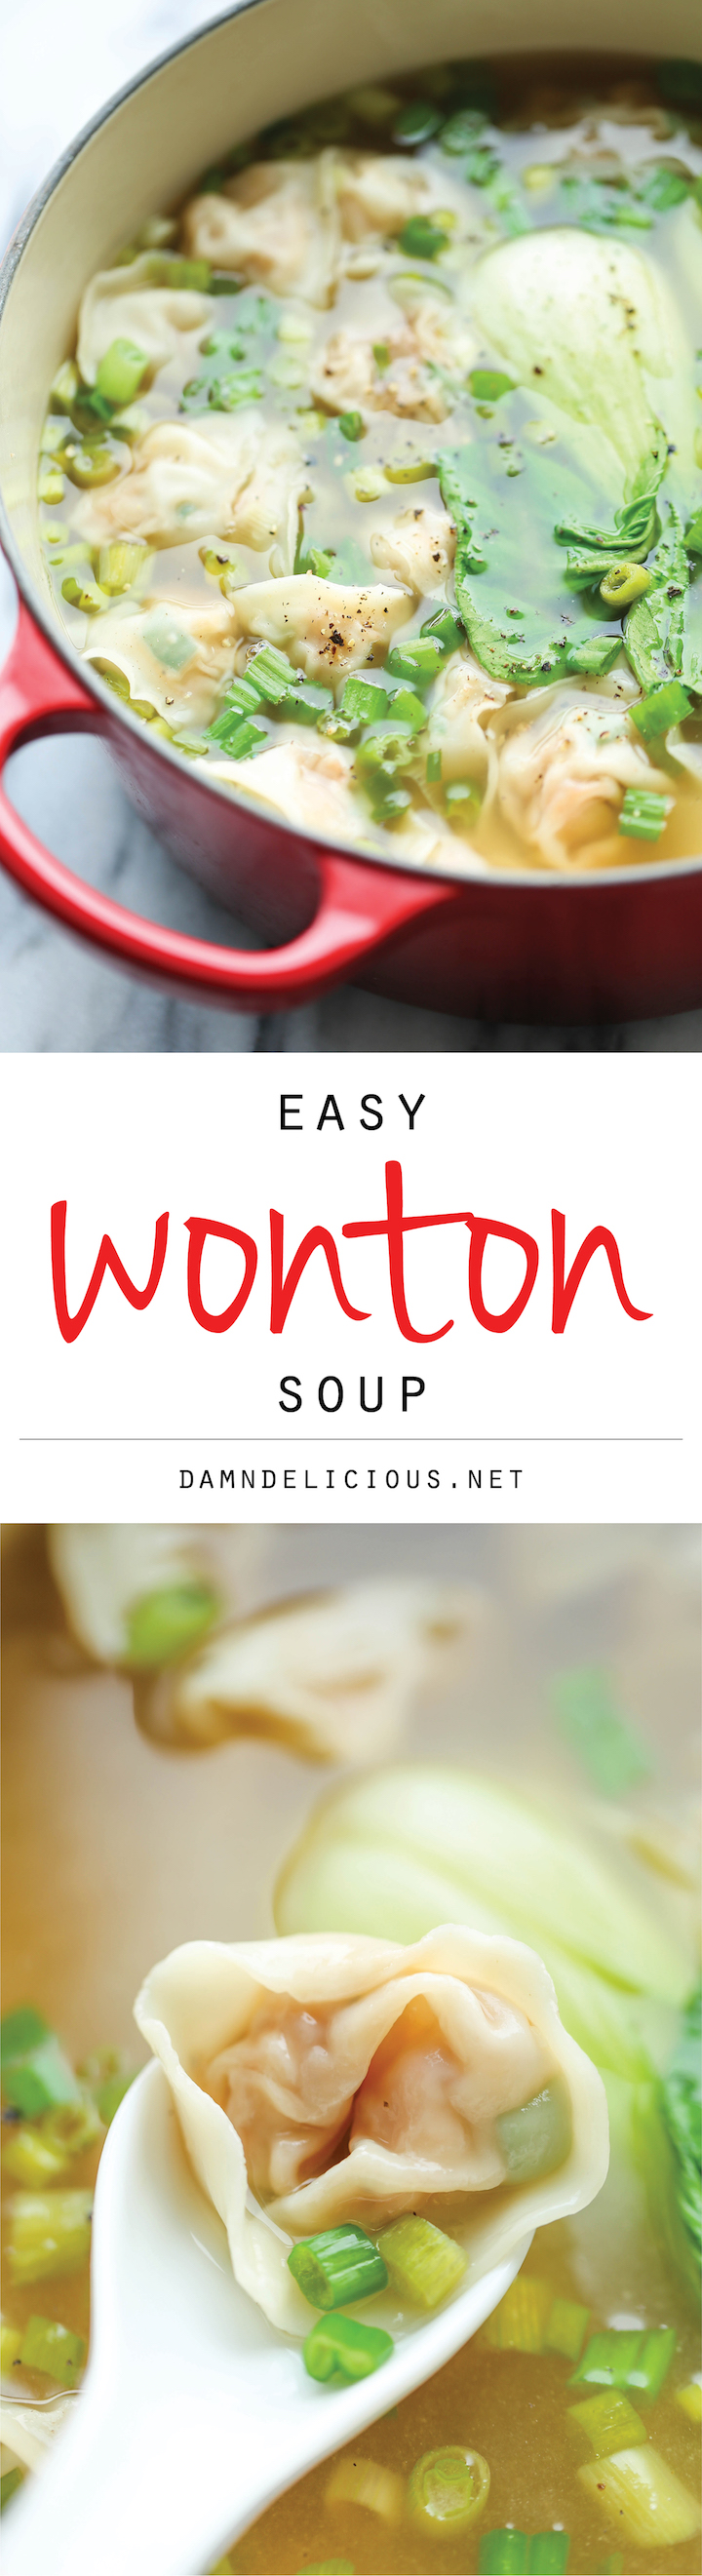 Wonton Soup - A super easy, light and comforting wonton soup that you can make right at home - and it tastes 1000x better than ordering out!